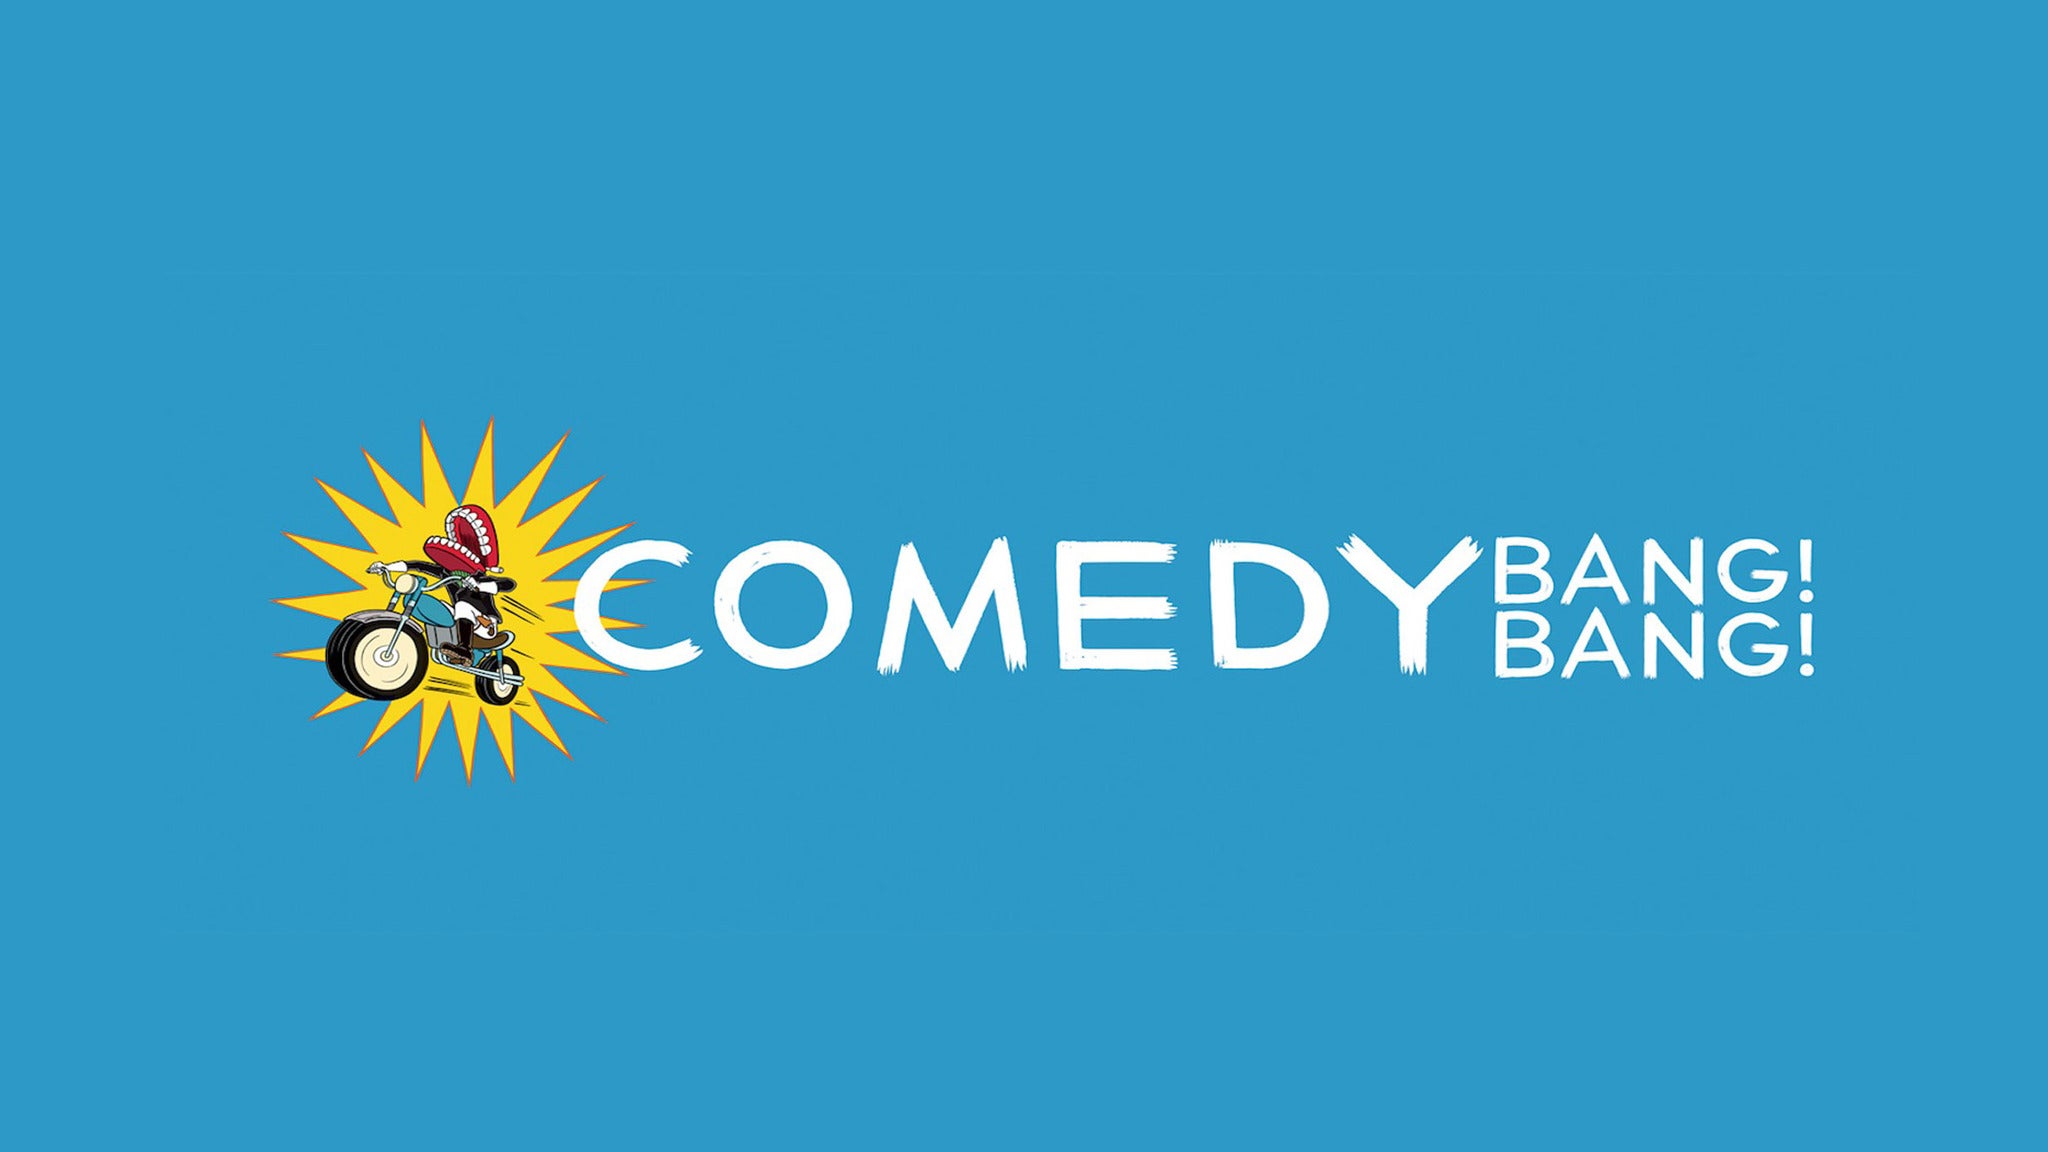 Comedy Bang! Bang! Live! Starring Scott Aukerman w/ guests in Washington promo photo for Official Platinum presale offer code